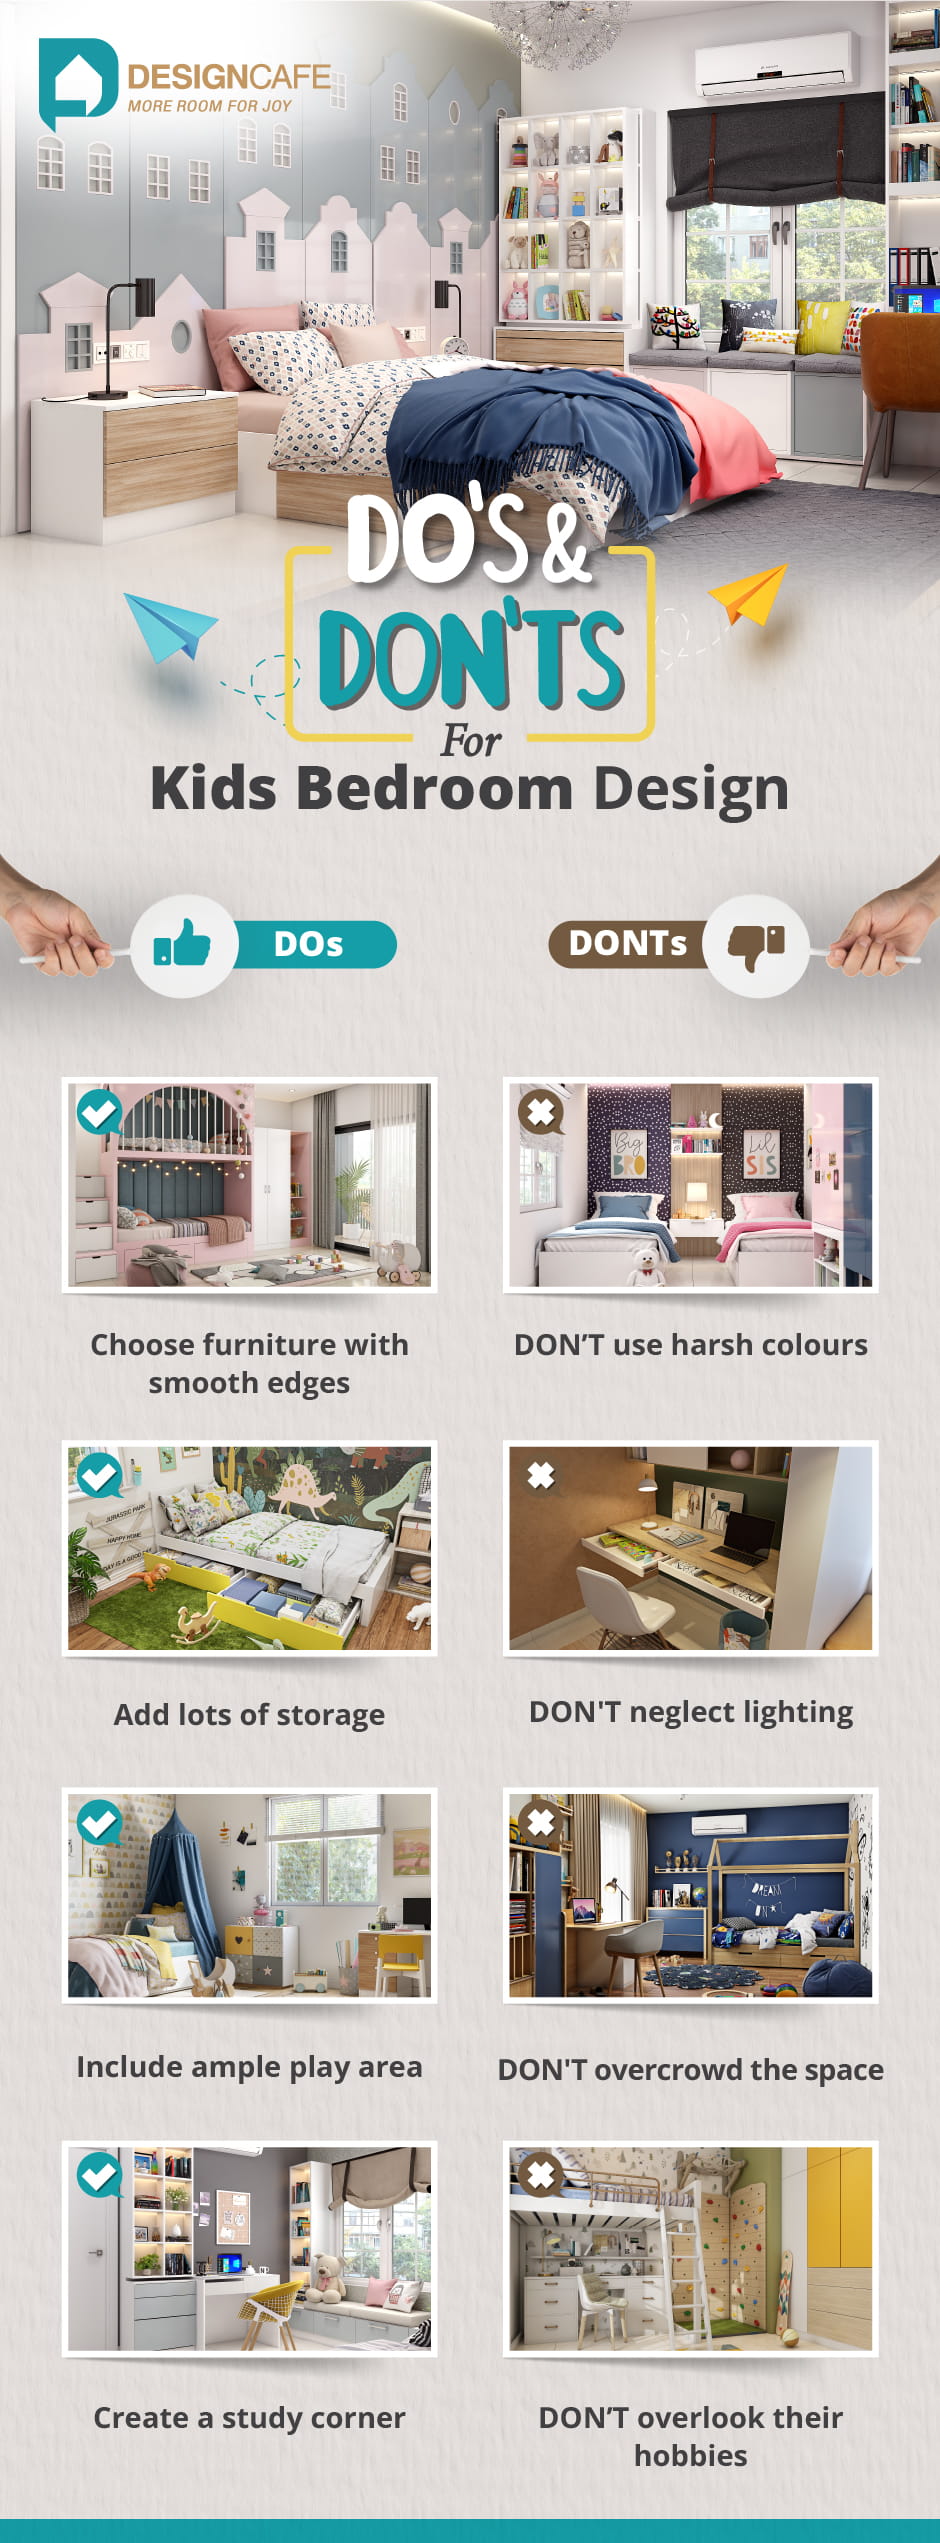 Do's and don'ts for kids bedroom interior design